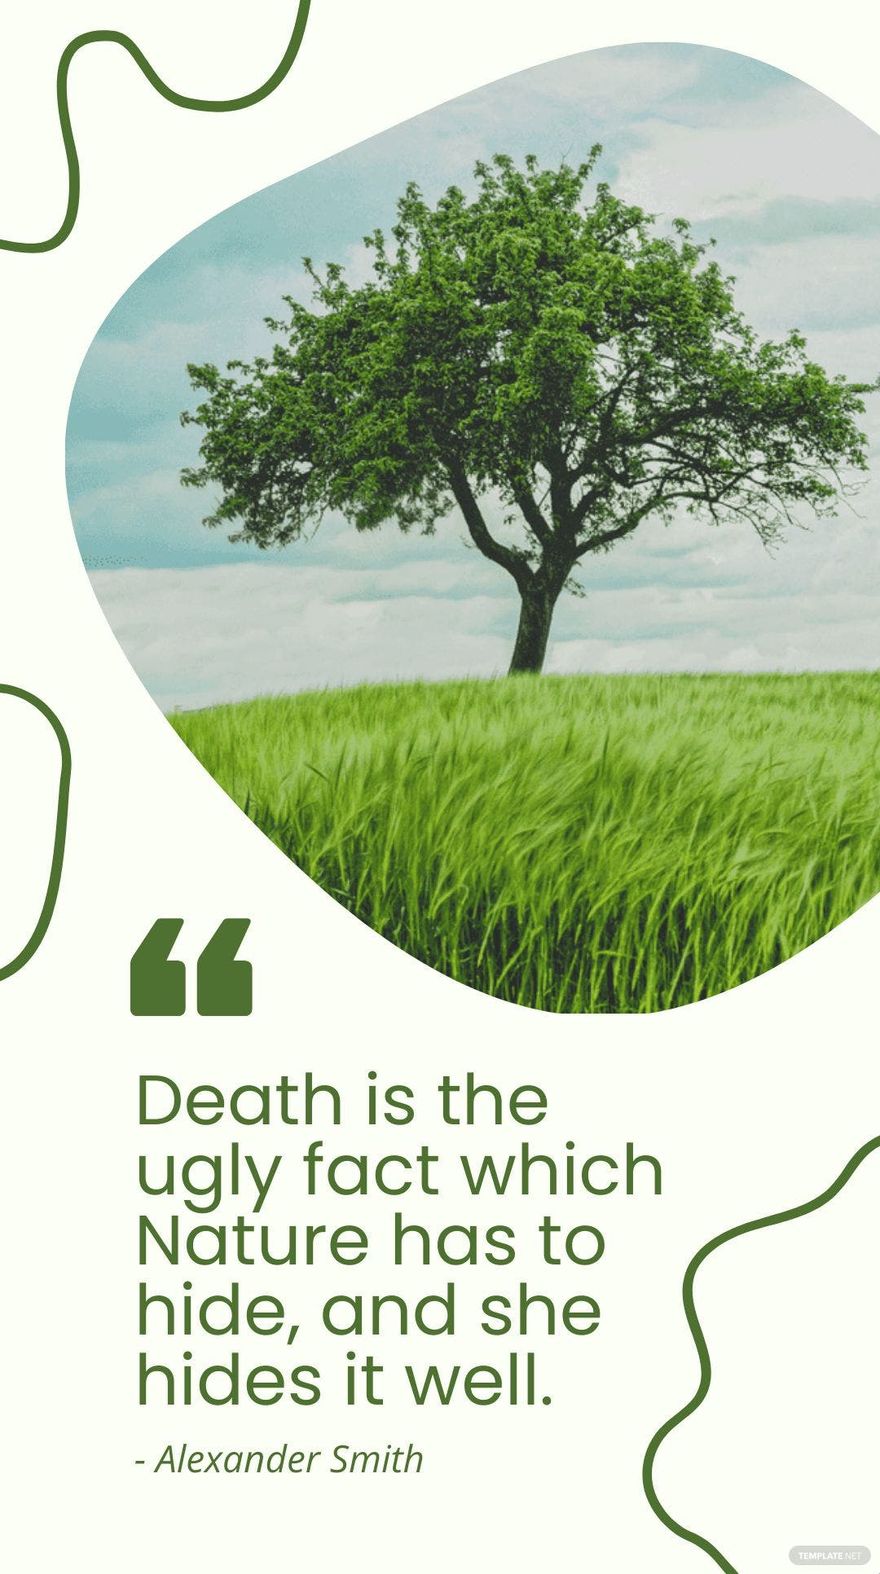 Alexander Smith - Death is the ugly fact which Nature has to hide, and she hides it well.